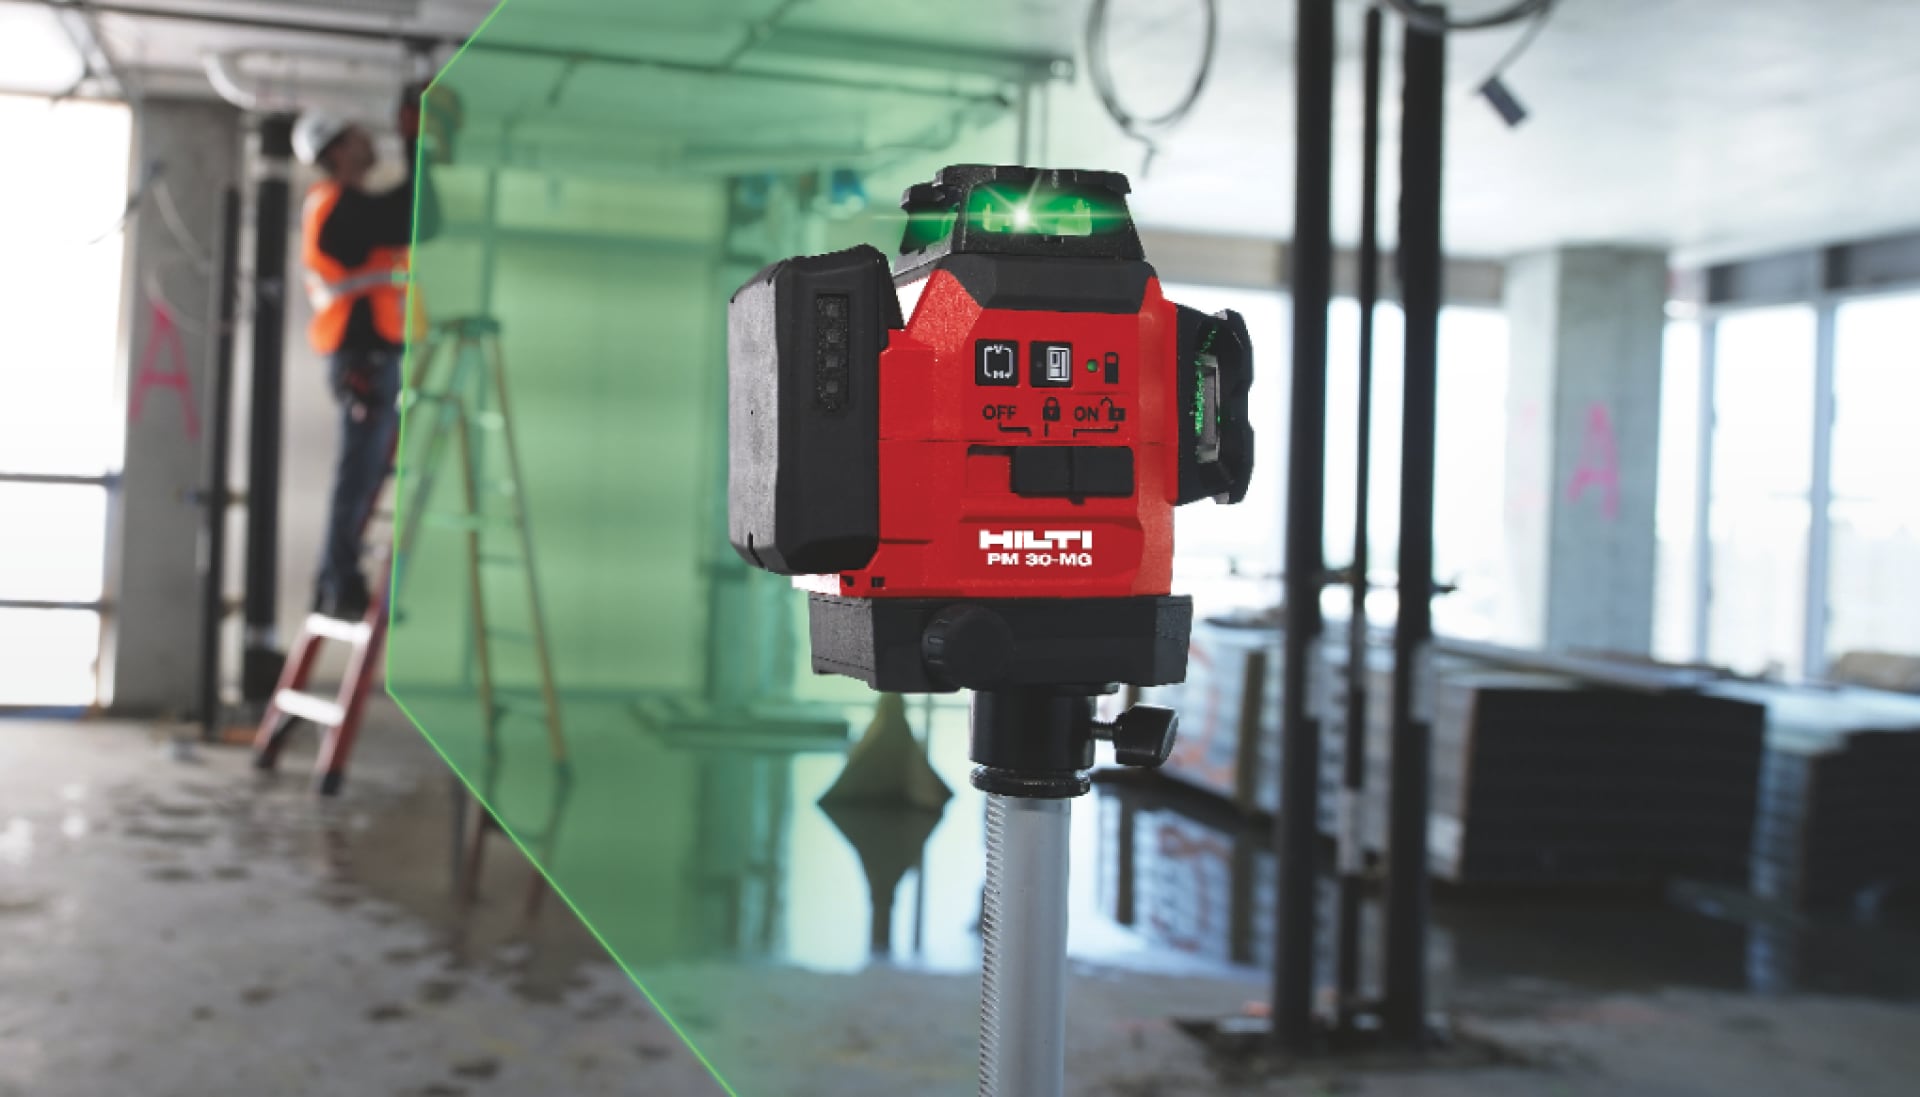 A laser scanning a building site with a man working on a ladder in the background